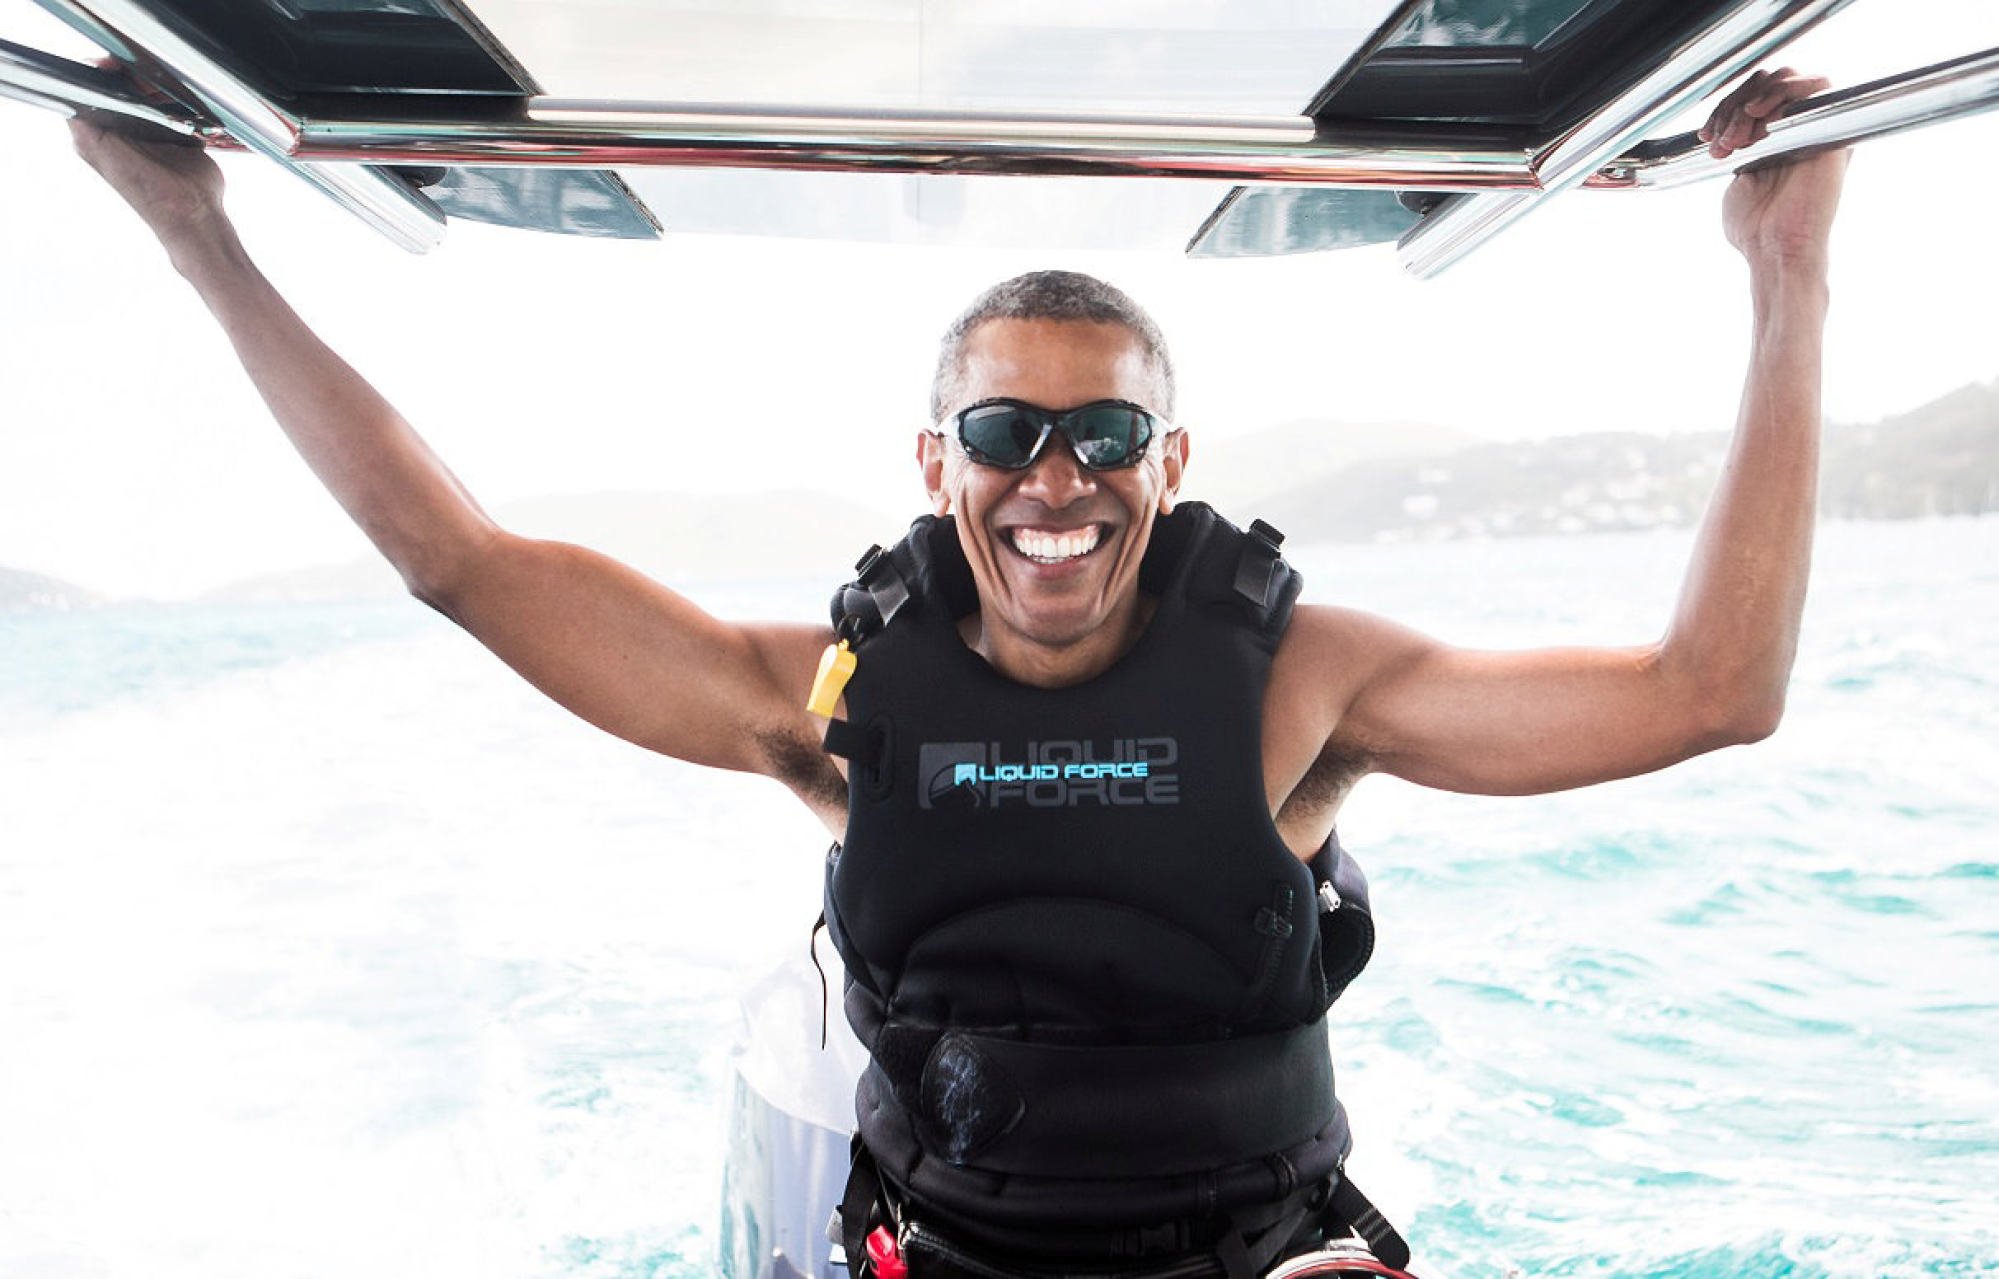 Former US President Barack Obama sits on a boat during a kite surfing outing with British businessman Richard Branson during his holiday in the British Virgin Islands, in February 2017. Photo: Reuters